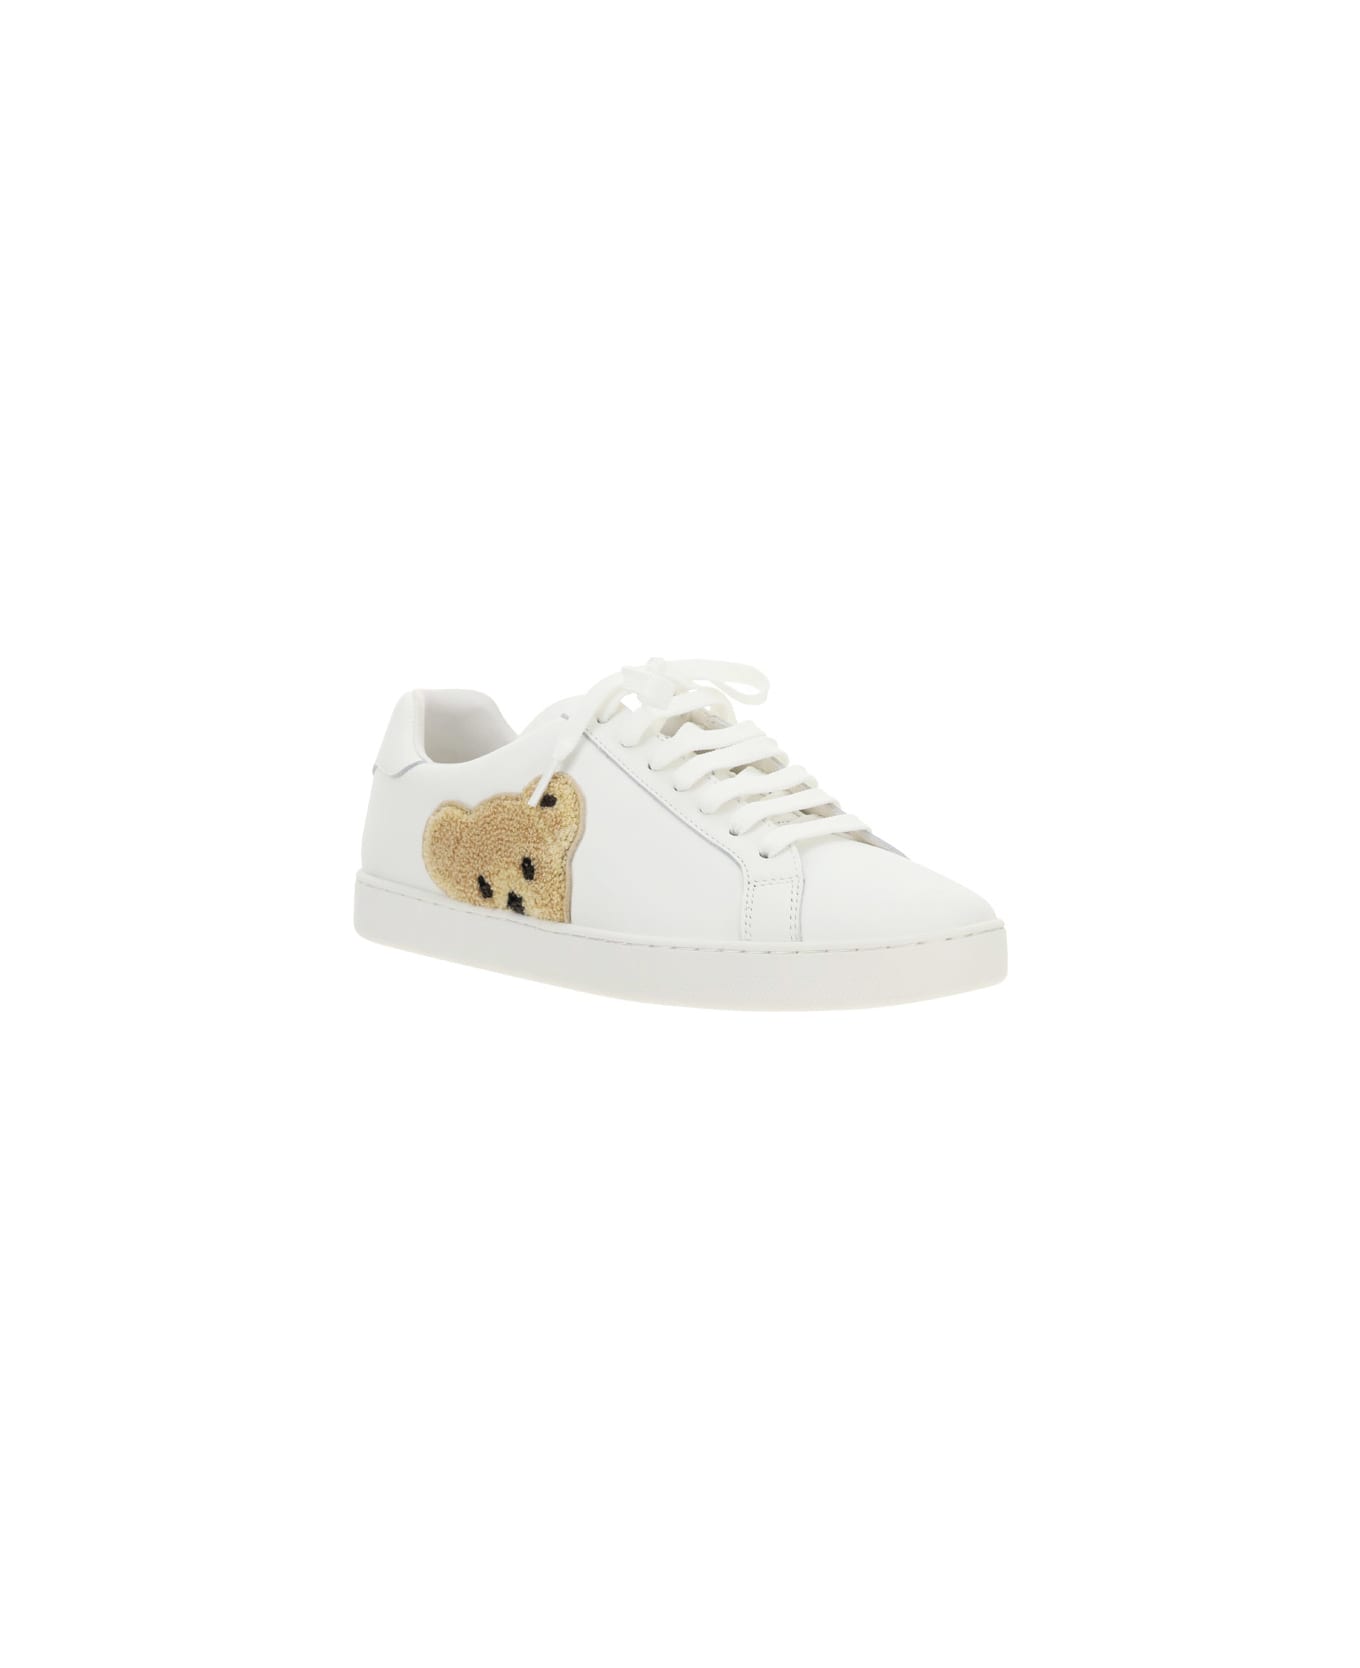 Palm Angels New Teddy Bear Sneakers - White/brown